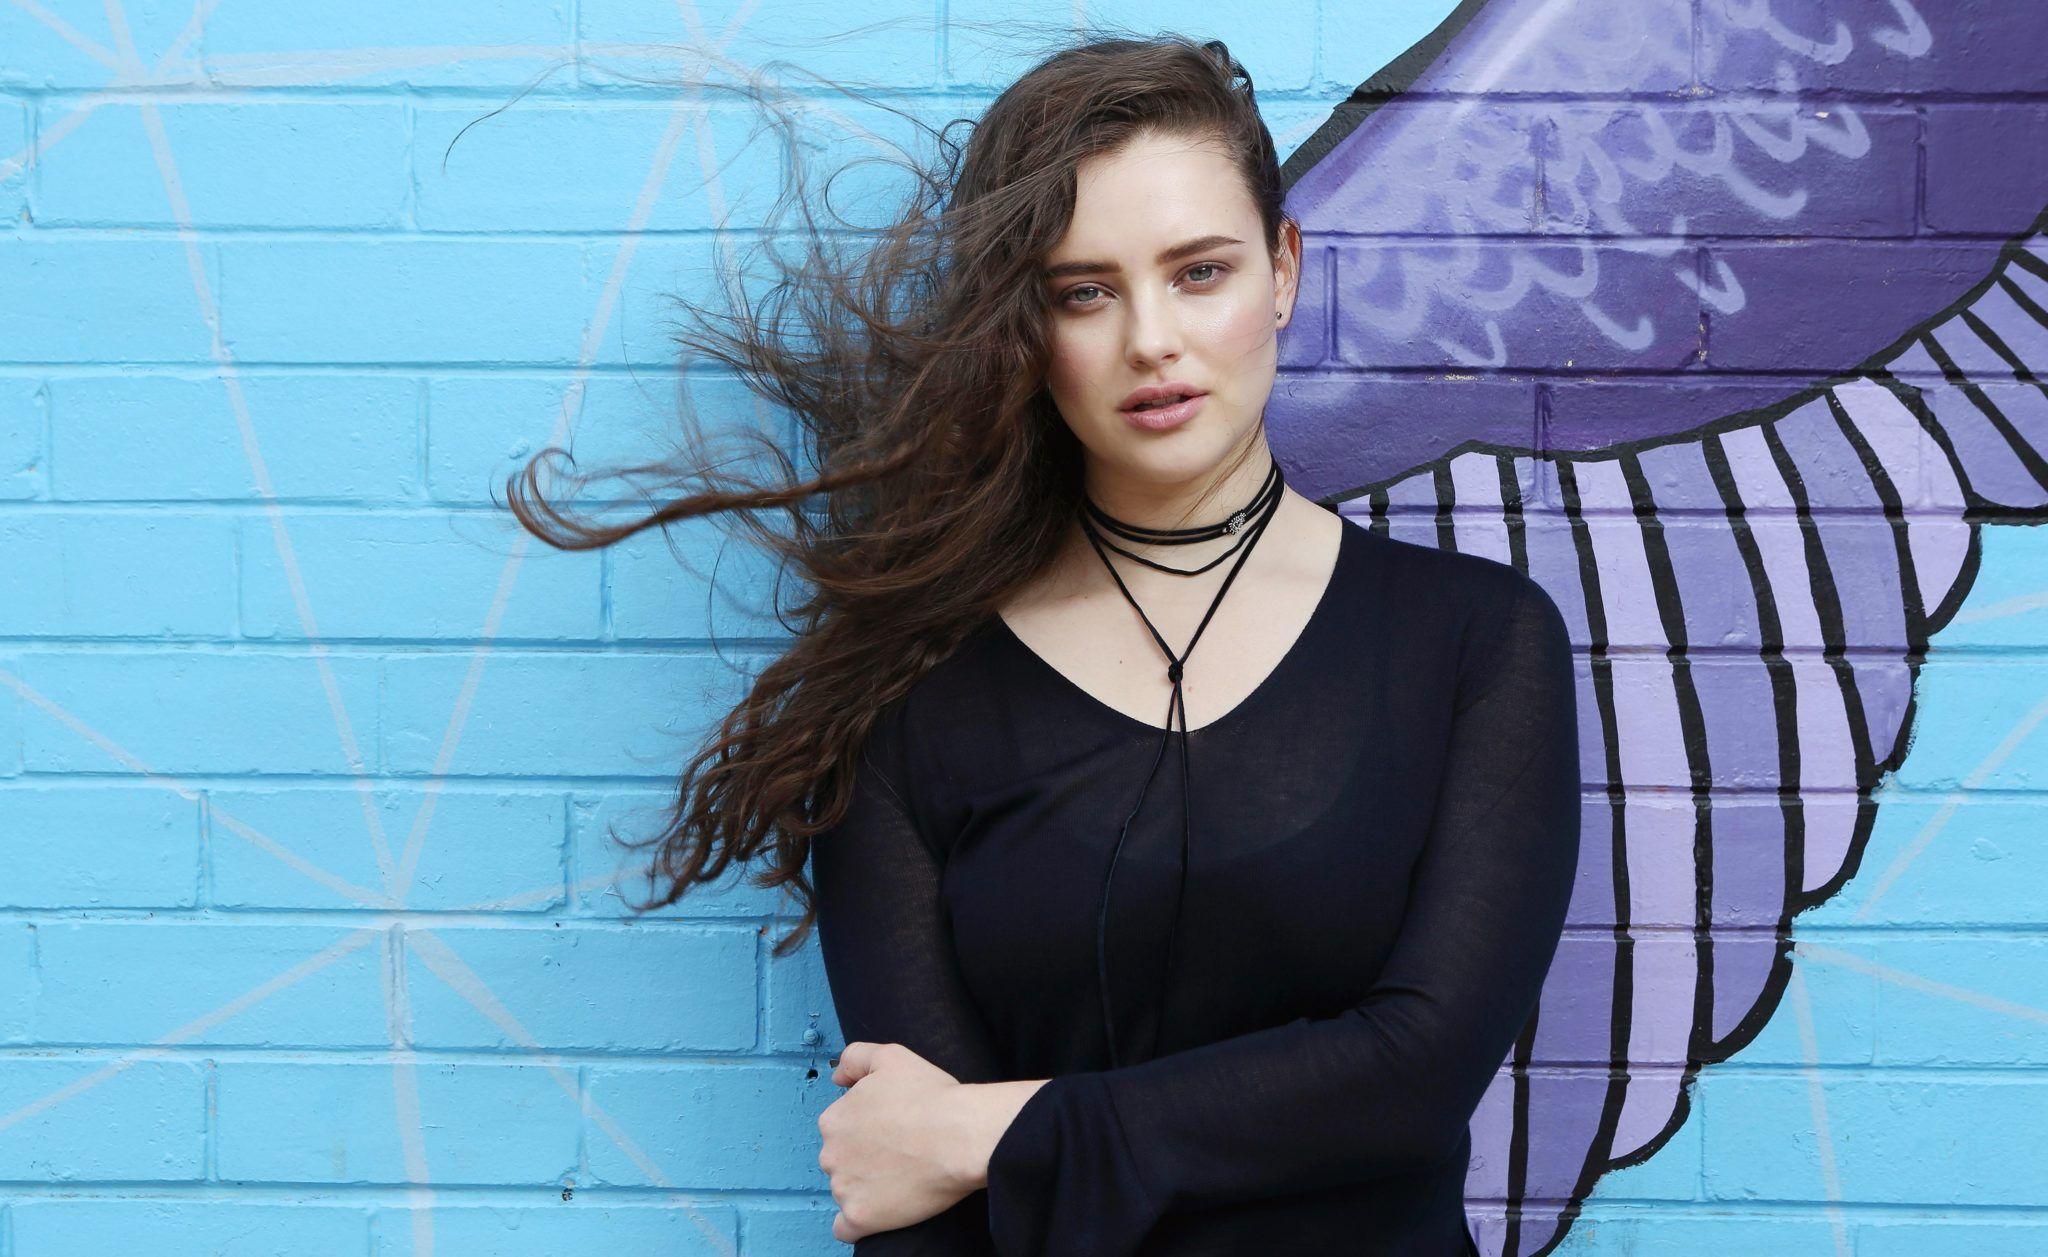 4K Wallpaper of Katherine Langford 2017 for Android, PC